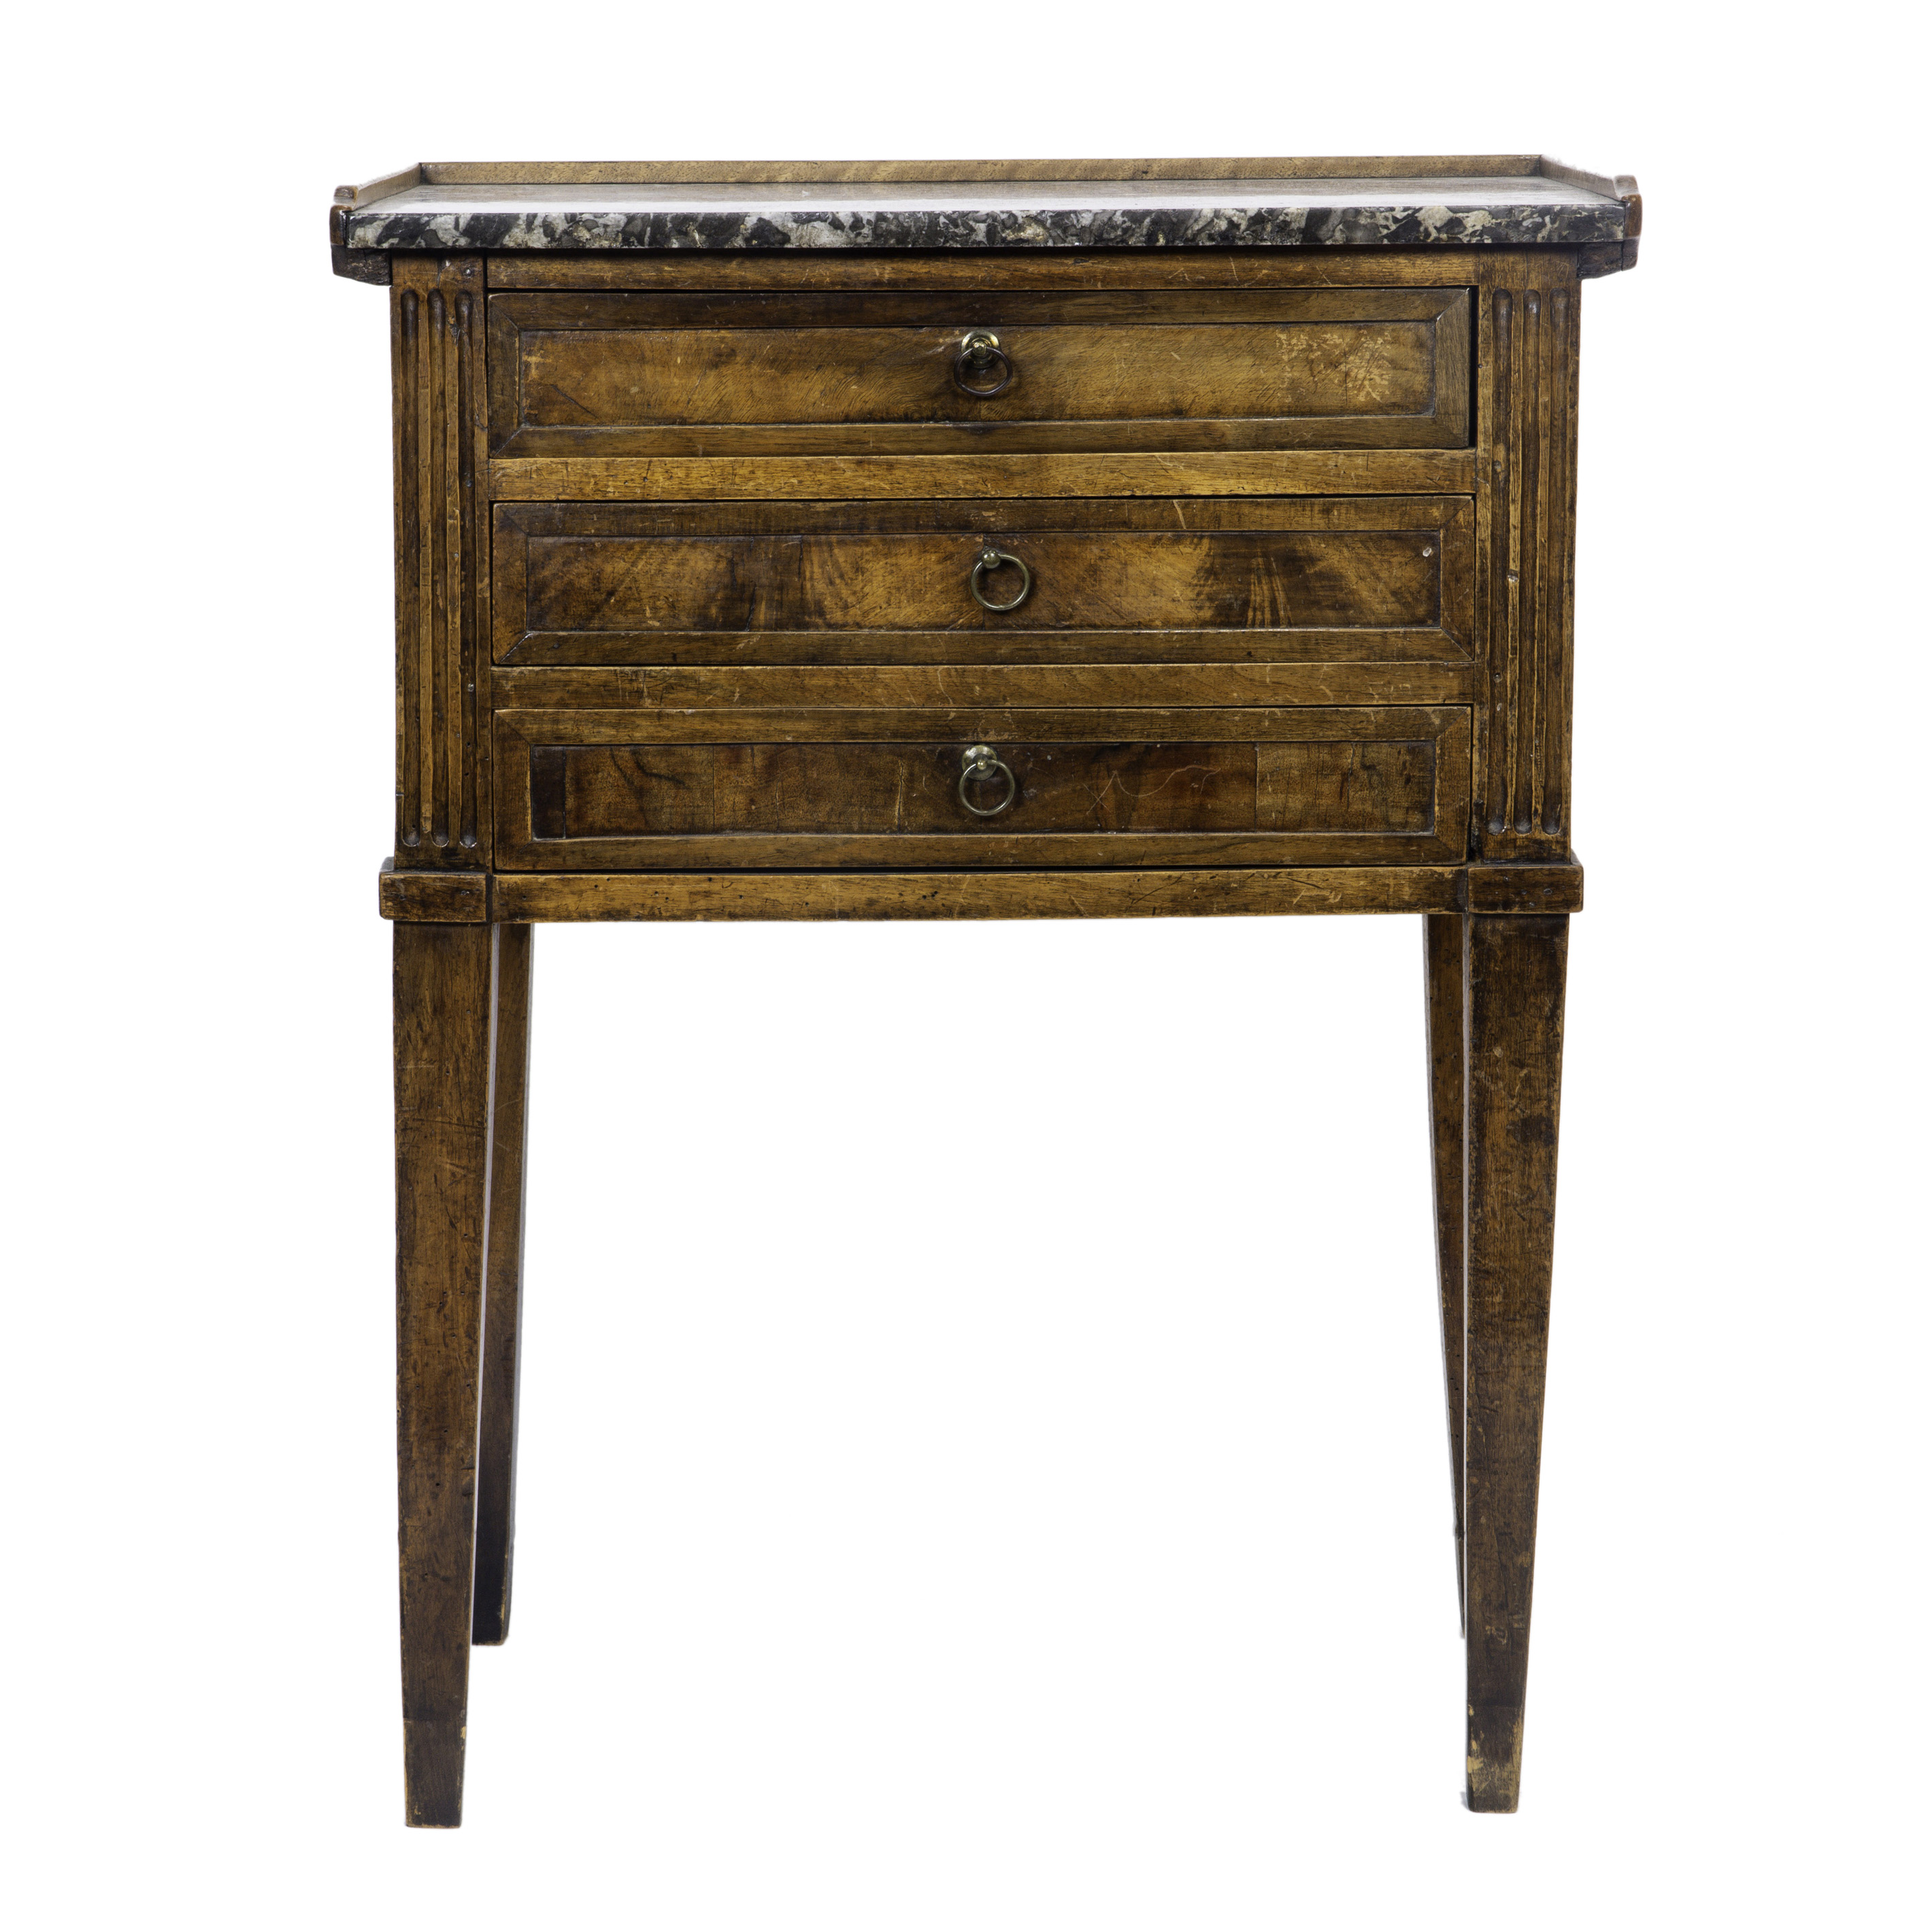 A FRENCH NEOCLASSICAL STYLE PETITE 3a427b